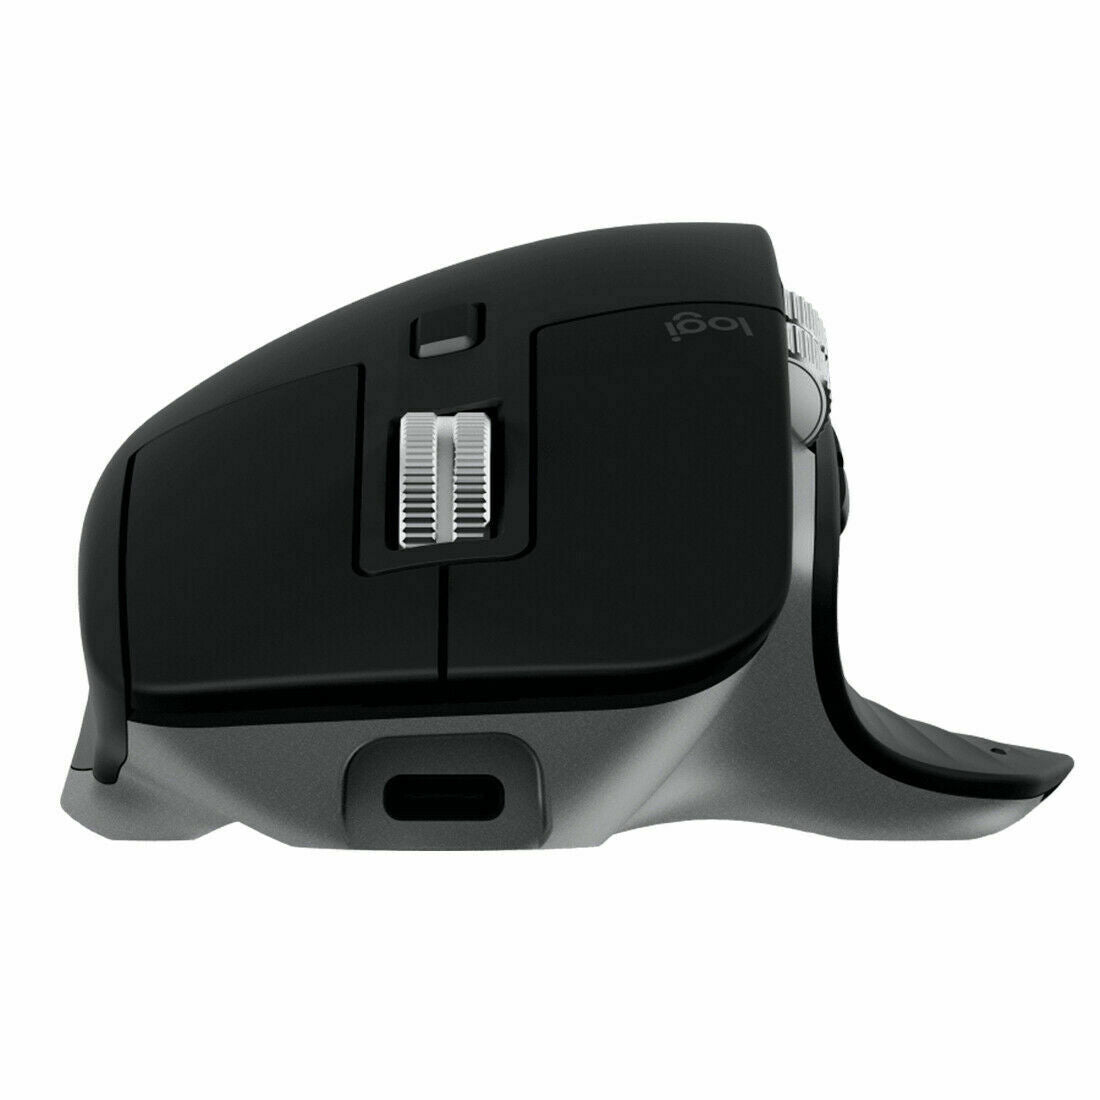 Logitech MX Master 3 Advanced 7 Buttons Wireless Laser Mouse for Mac, 910-005647